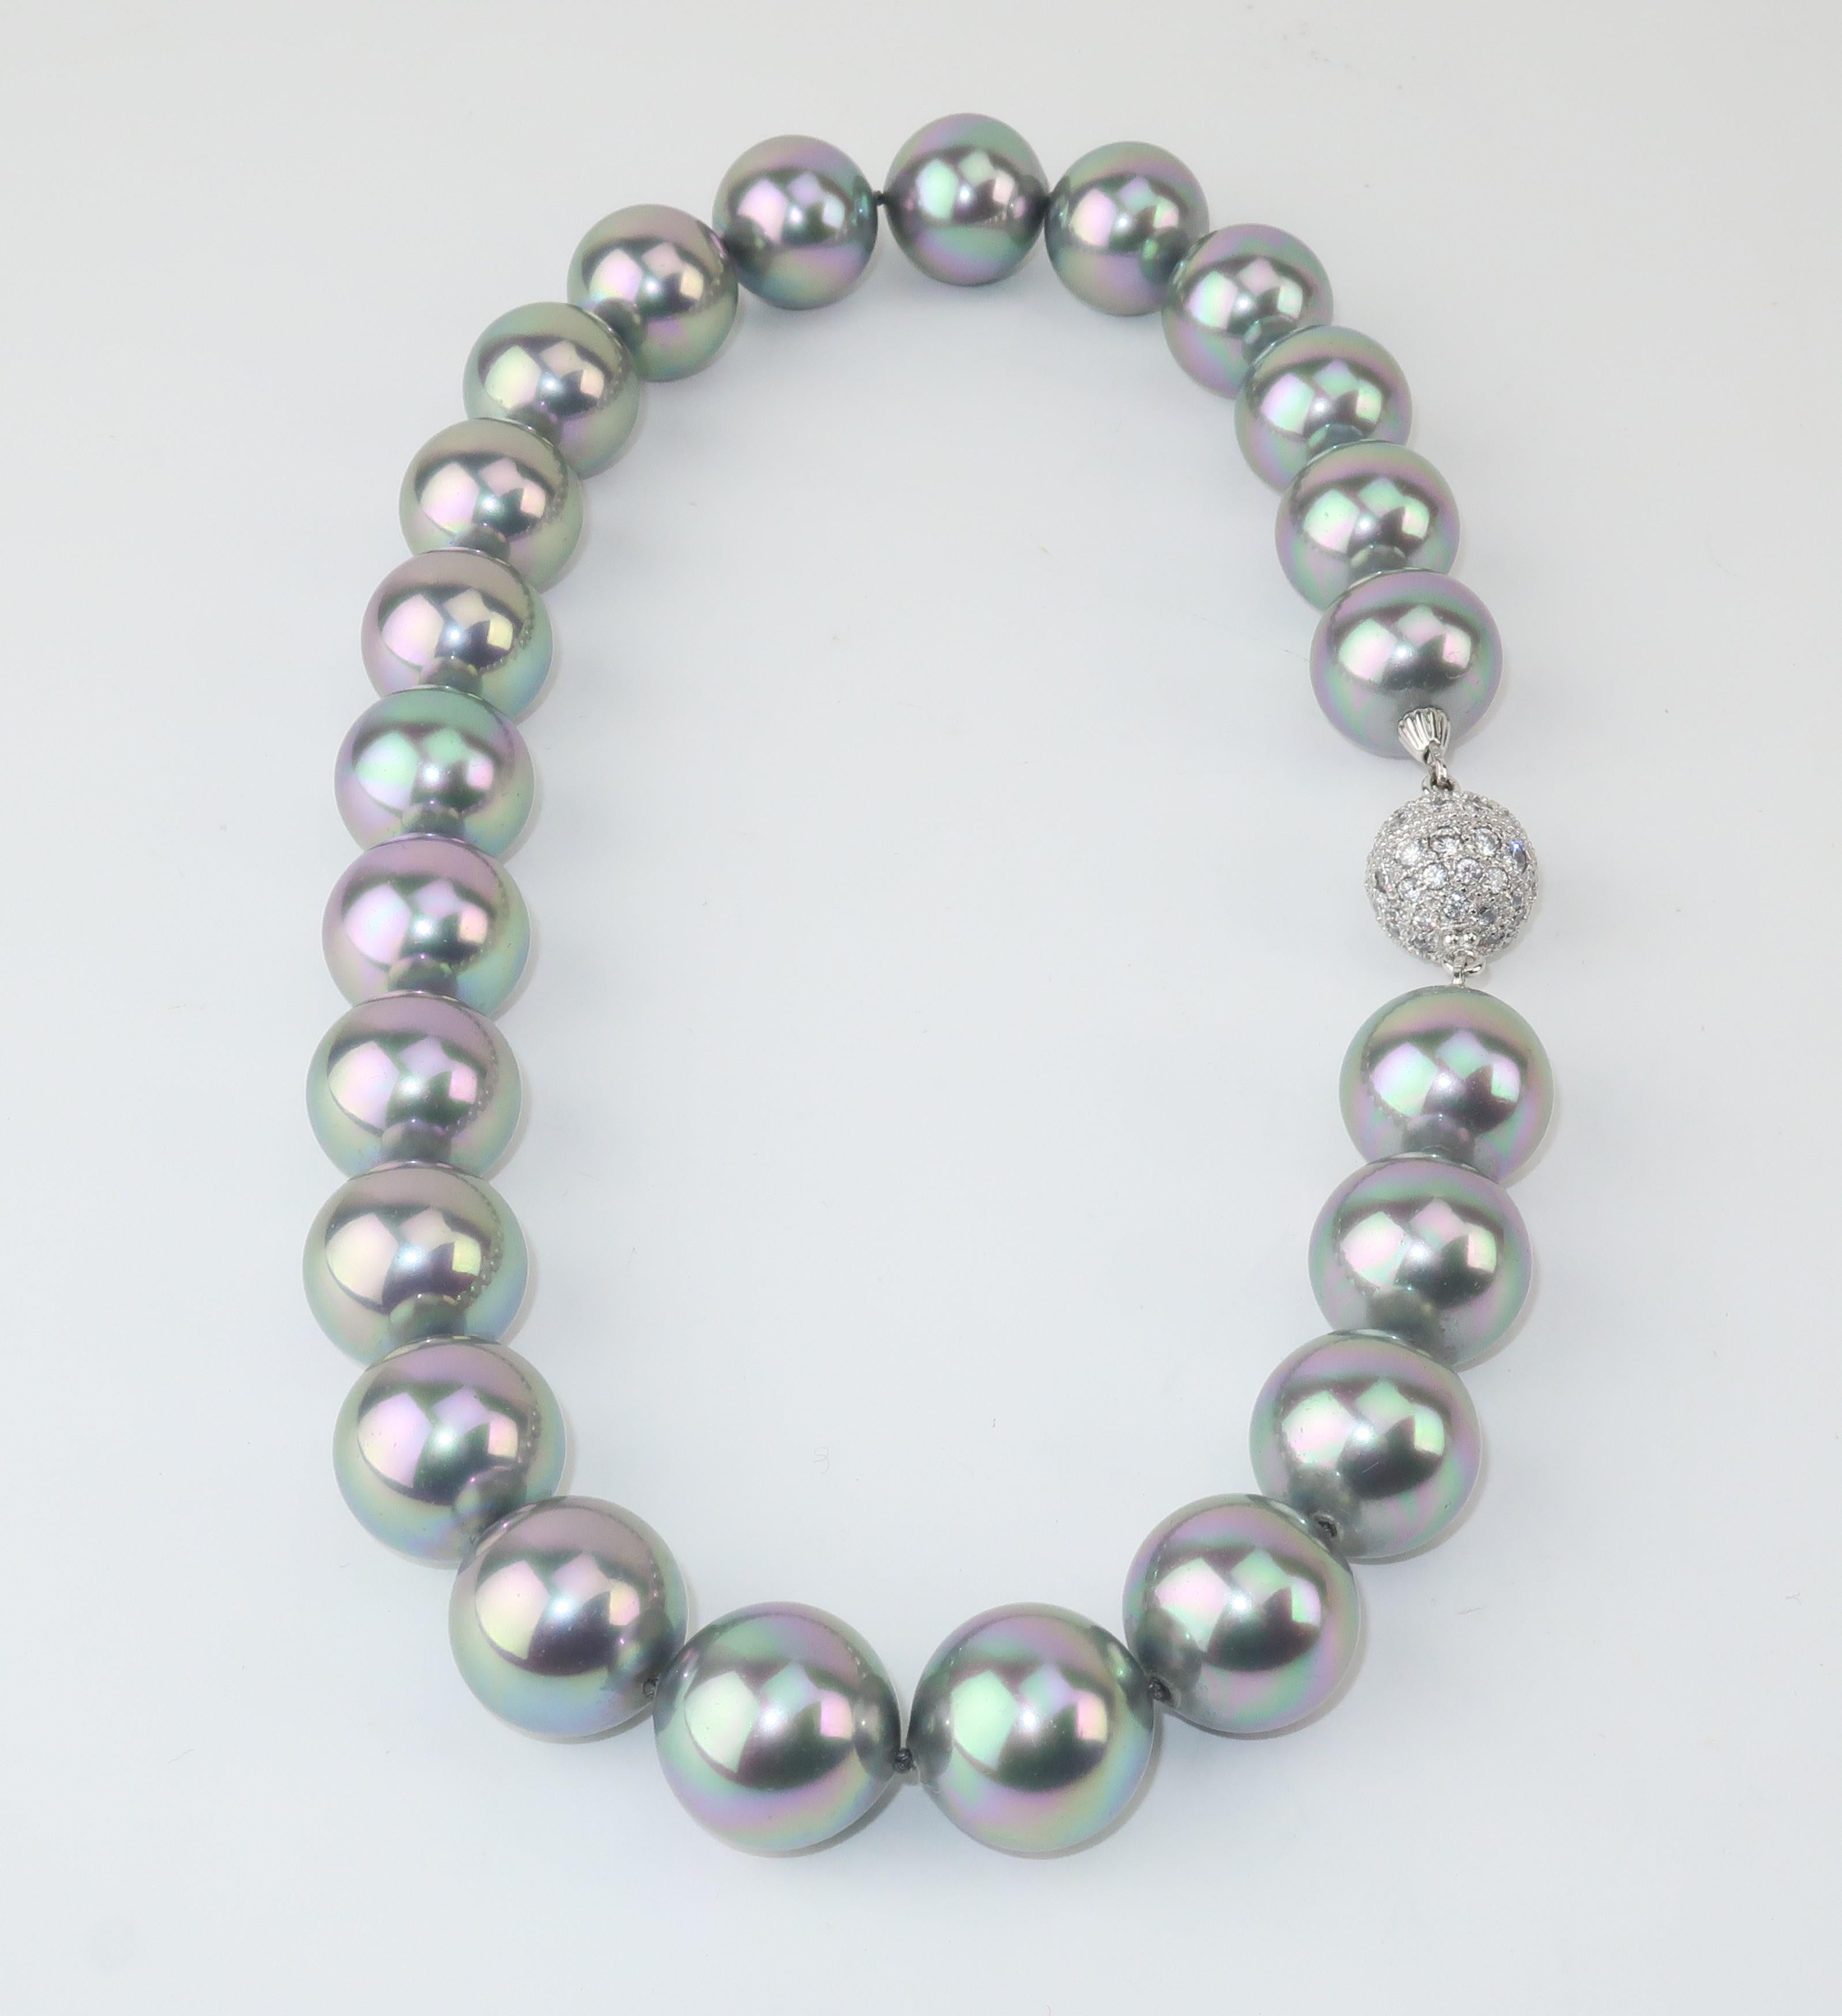 Baroque Faux Gray Pearl Choker Necklace With Rhinestone Closure For Sale